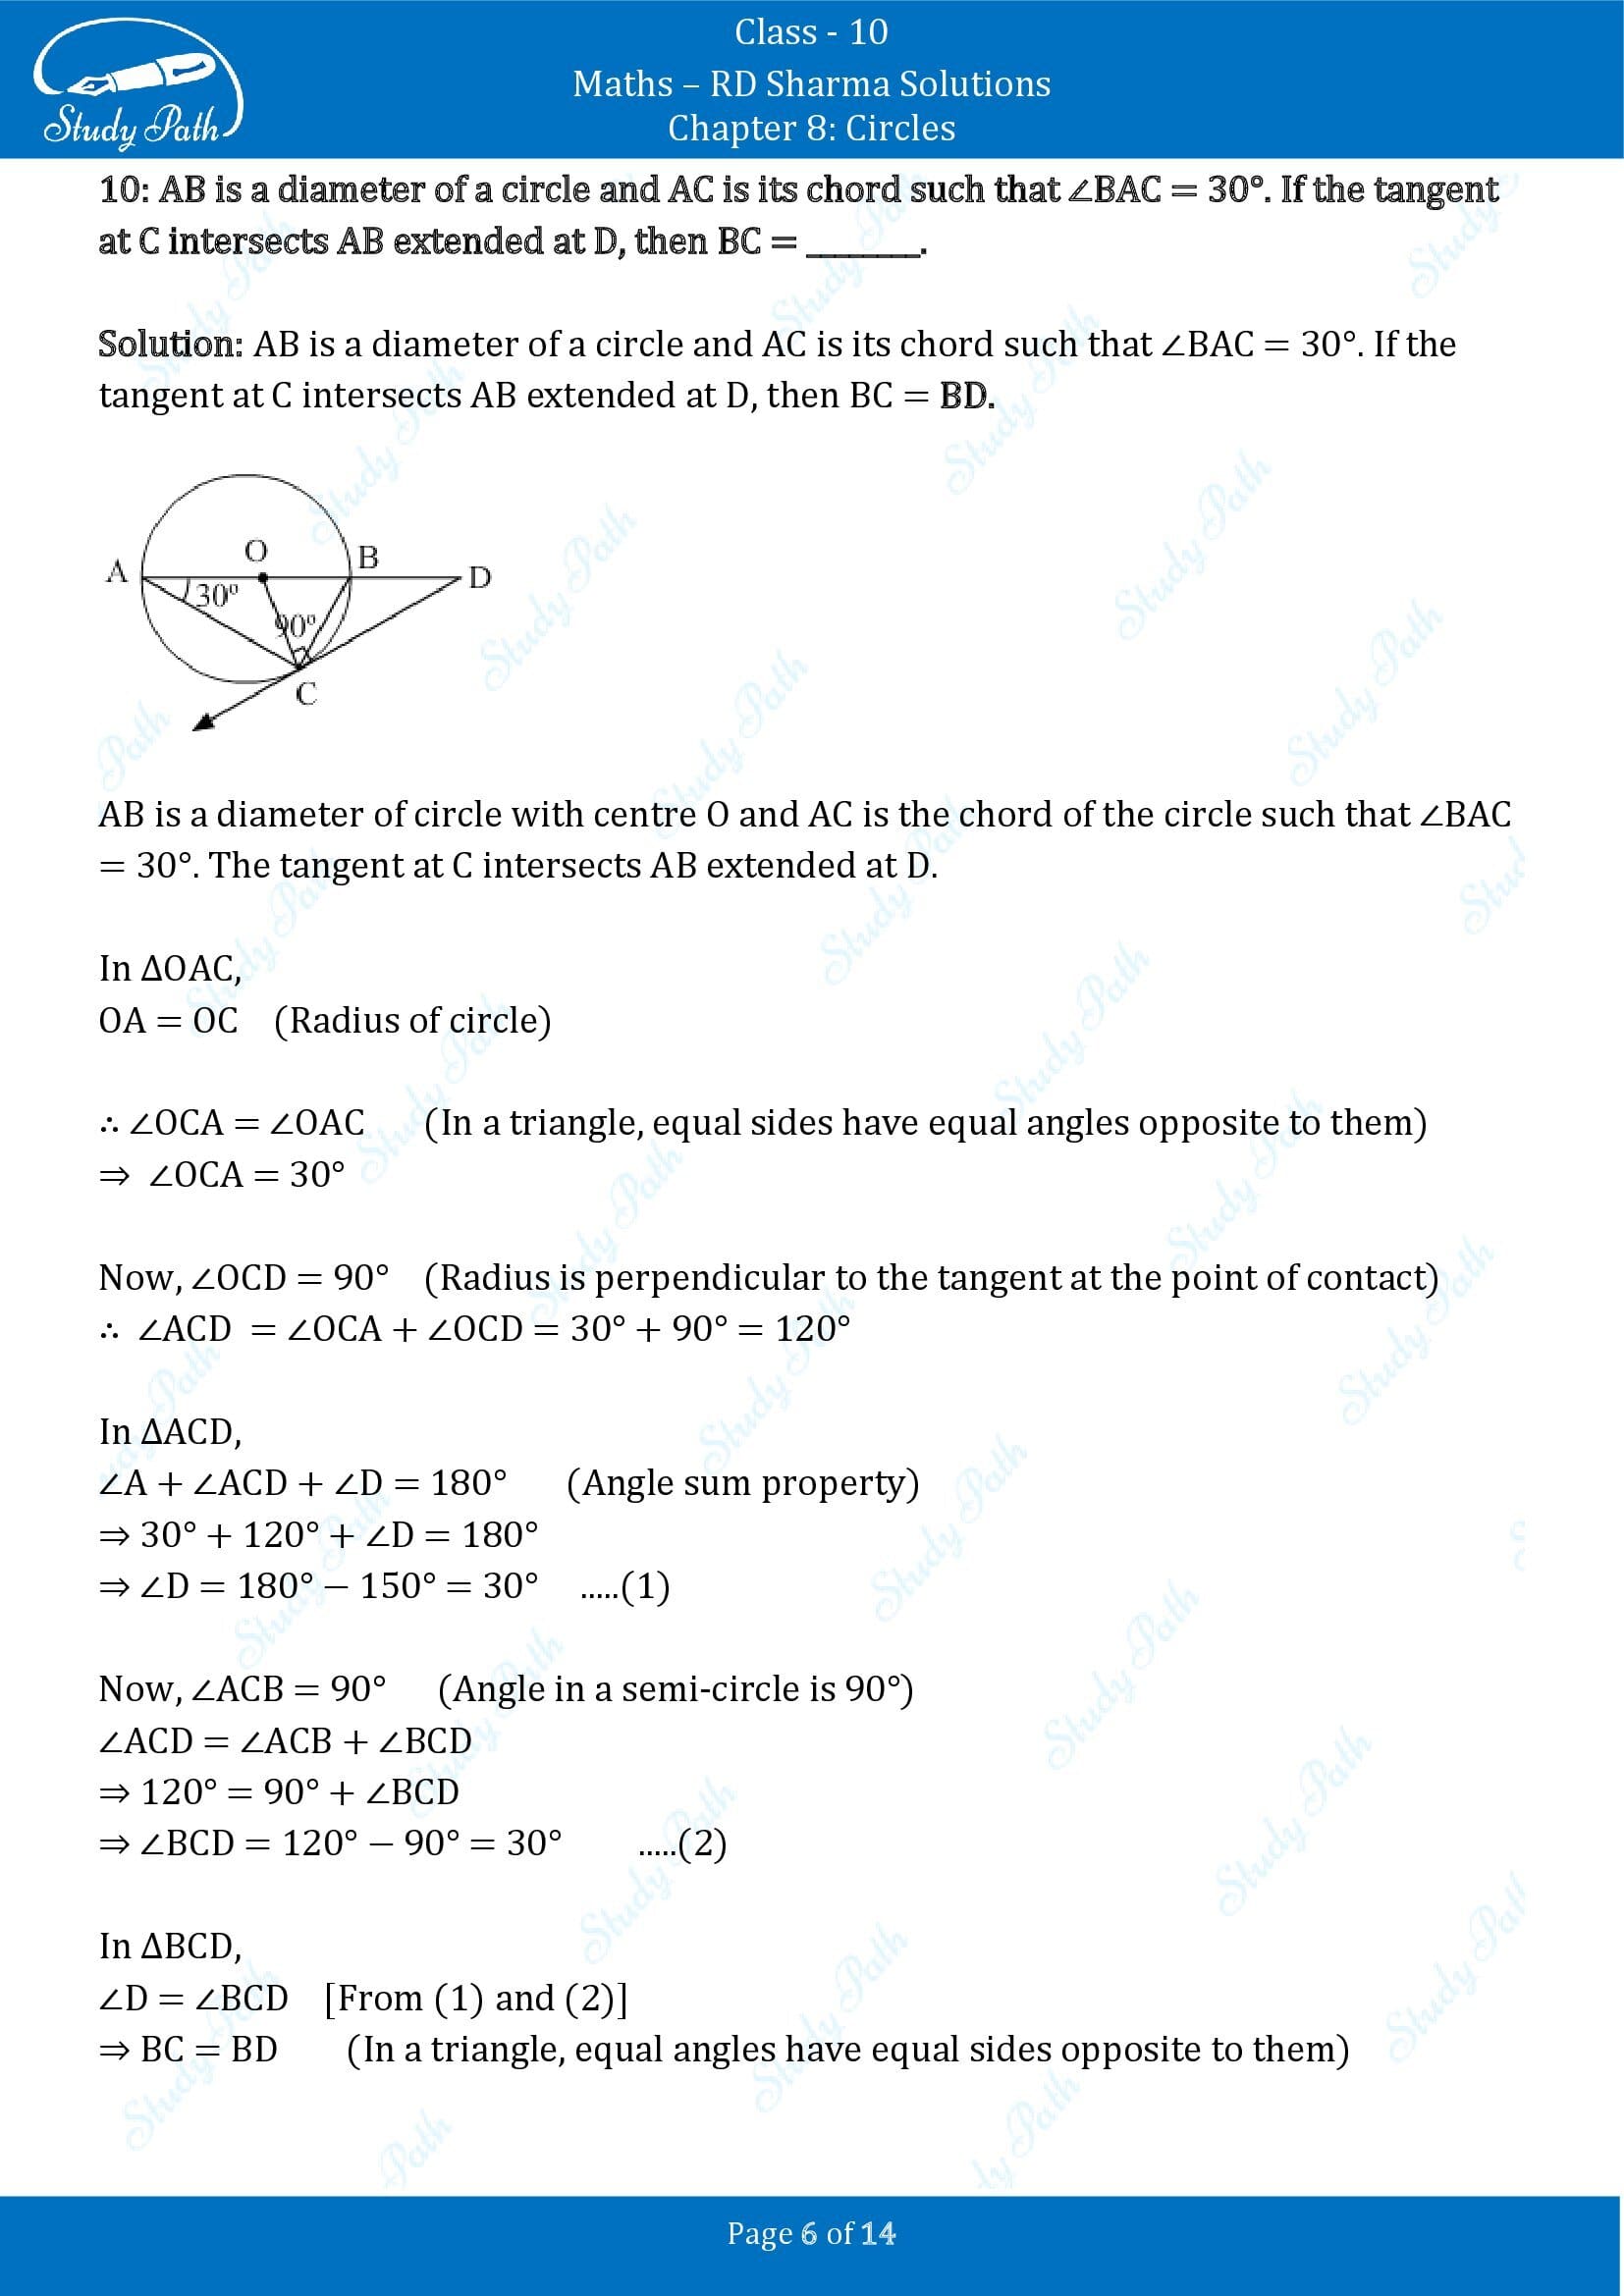 RD Sharma Solutions Class 10 Chapter 8 Circles Fill in the Blank Type Questions FBQs 00006